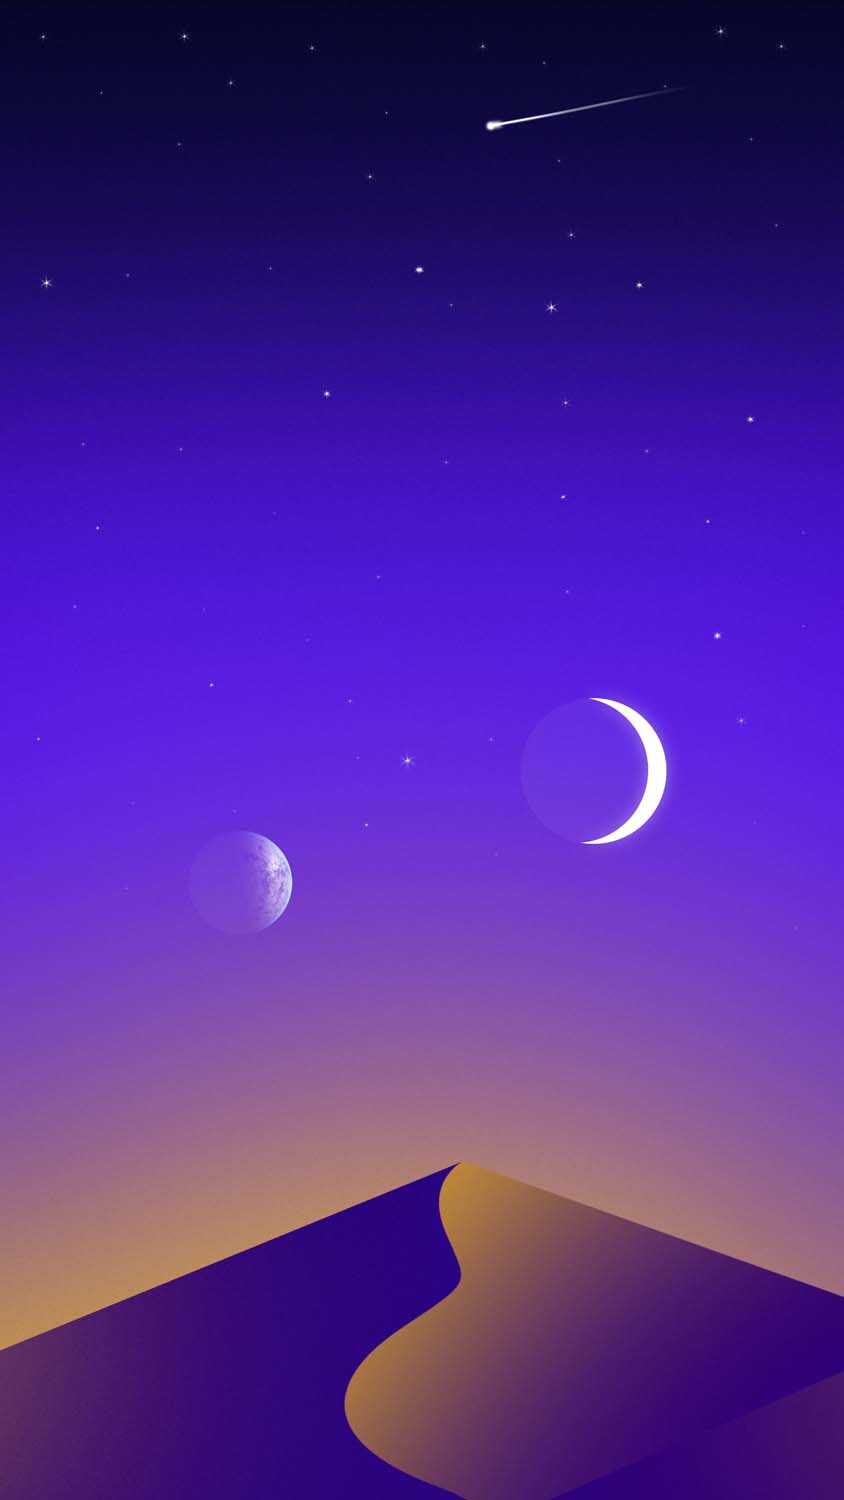 Dual Moon IPhone Wallpaper HD - IPhone Wallpapers : iPhone Wallpapers